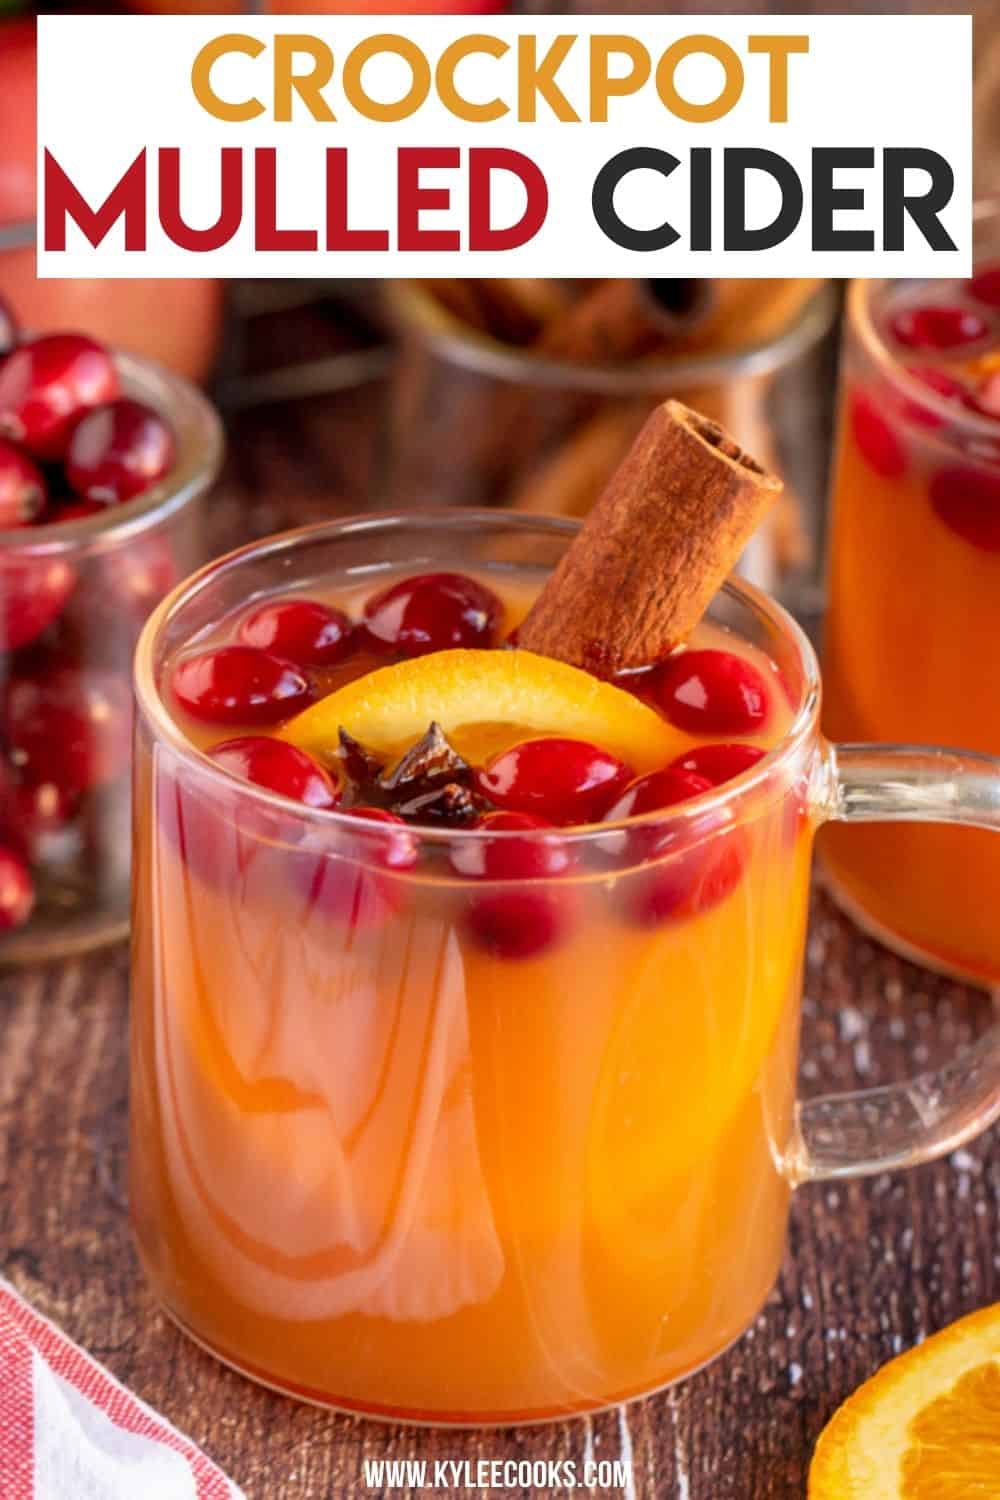 mulled apple cider with recipe name overlaid in text